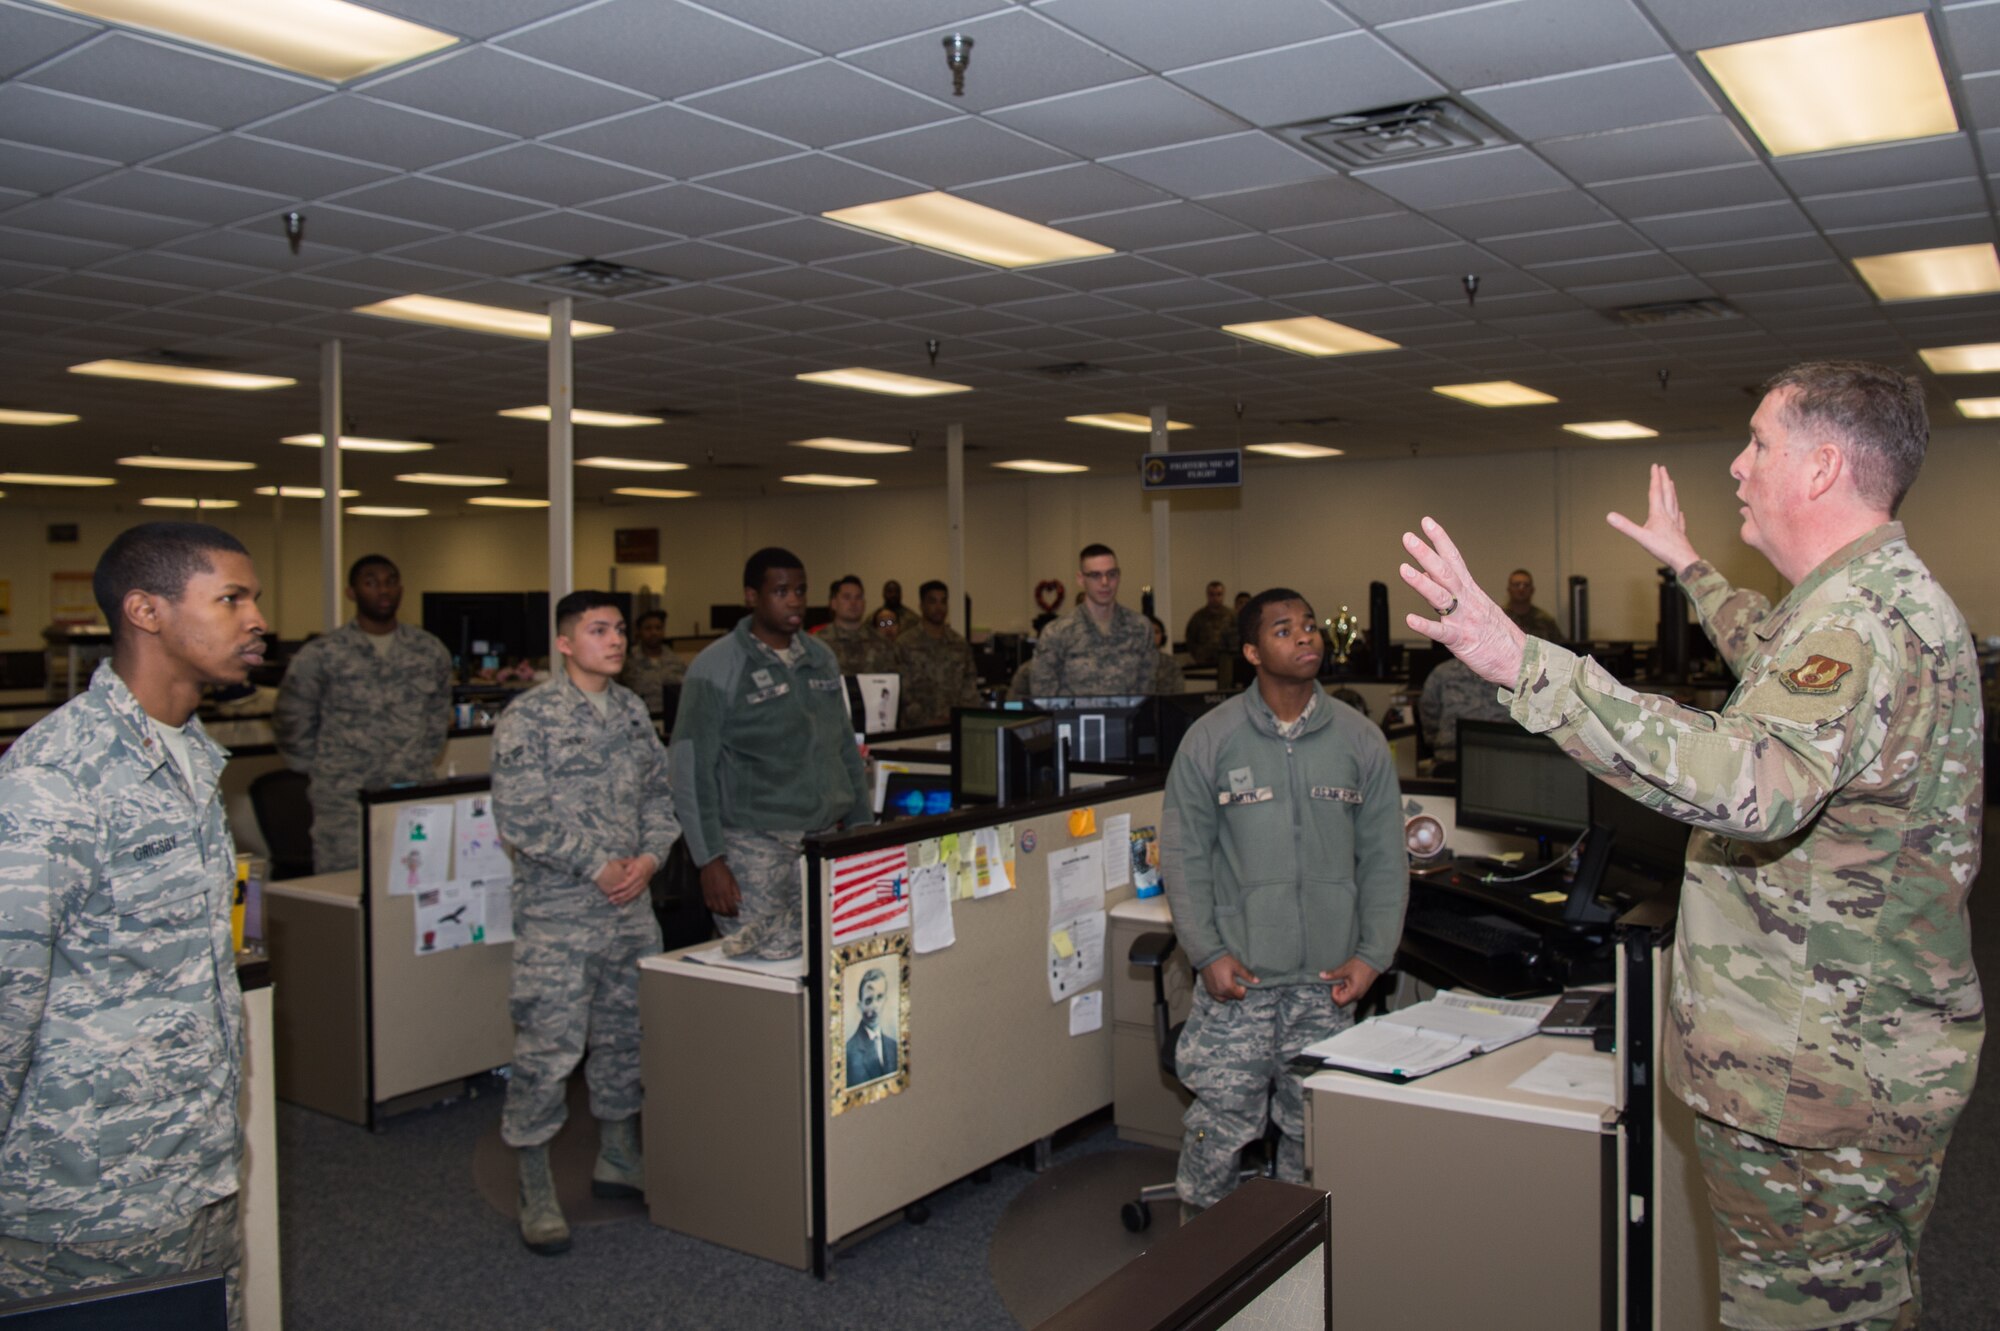 U.S. Air Force Lt. Gen. Gene Kirkland, Air Force Sustainment Center commander, addresses members of the 735th Supply Chain Operation Group during his visit to Joint Base Langley-Eustis, Virginia, Jan. 28, 2020. Kirkland highlighted that the supply and transportation professionals at the 735 SCOG have a global reach when it comes to making sure aircraft or vehicle parts, needed at any base in the world, are being tracked and a solution is being made to resolve the issue. (U.S. Air Force photo by Senior Airman Tristan Biese)